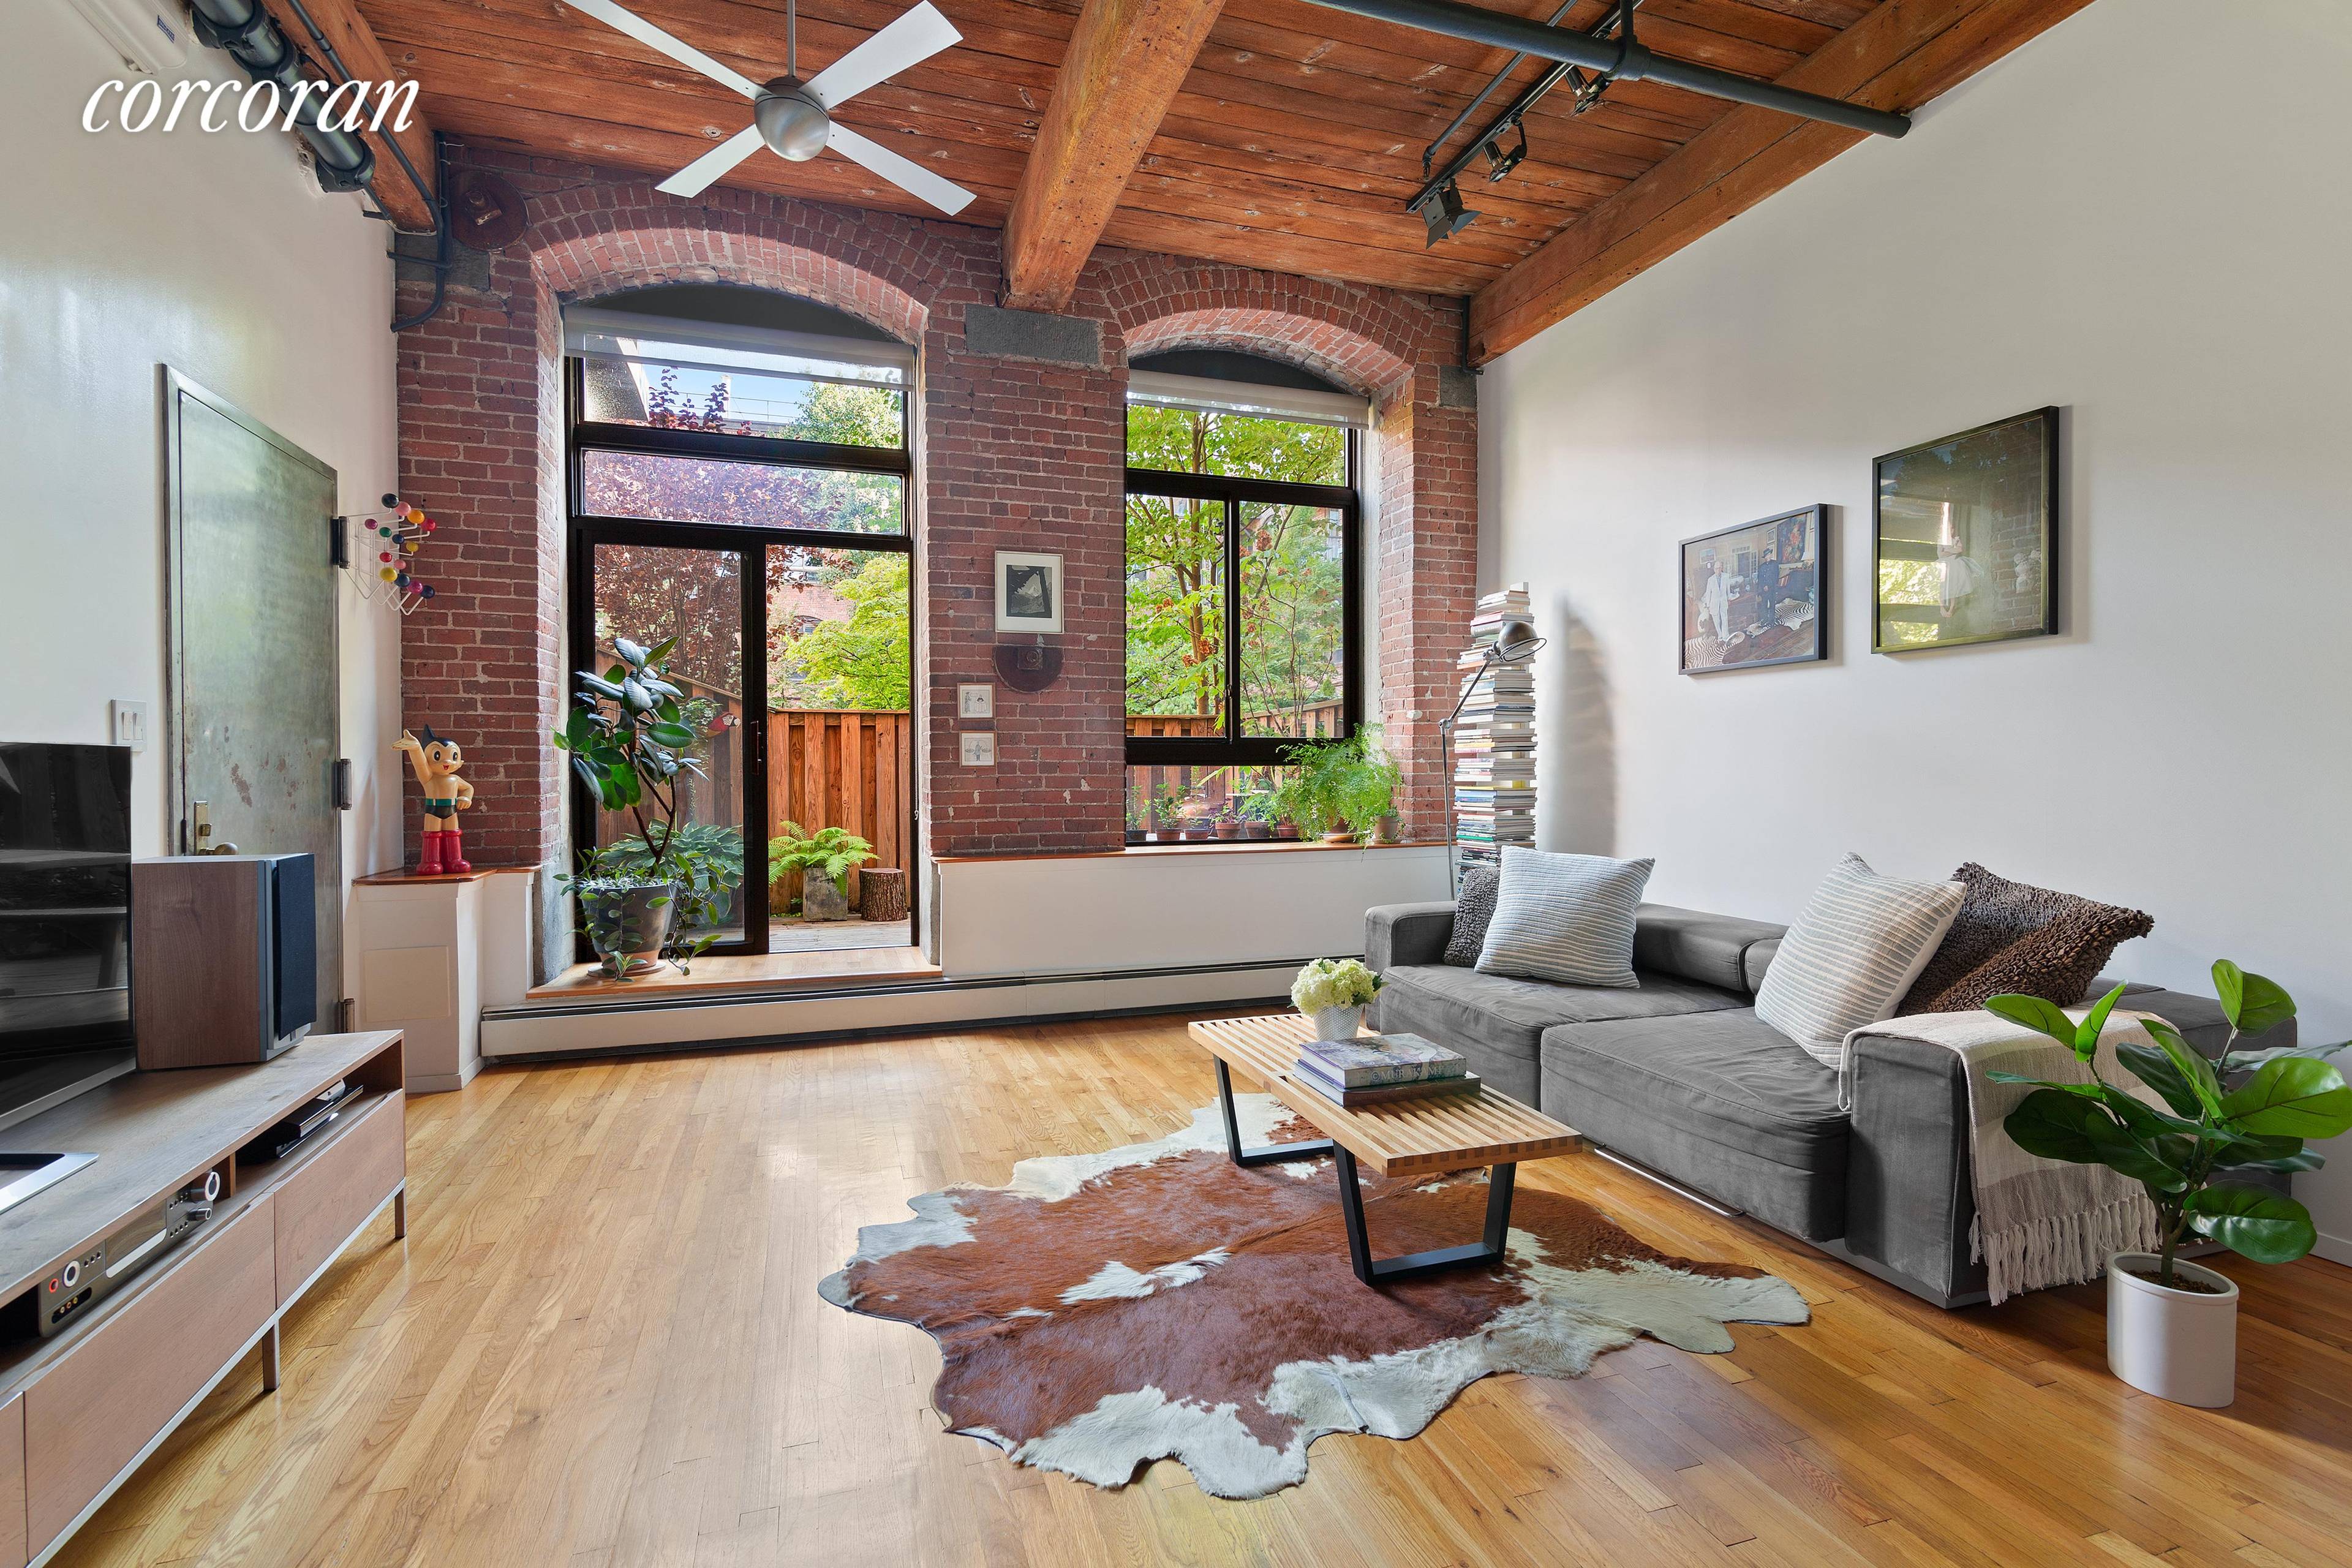 420 12th Street, G1L and Garden Authentic Brick amp ; Timber Loft at the coveted Ansonia Court This spacious one bedroom, one bathroom duplex home has a rustic chic vibe ...